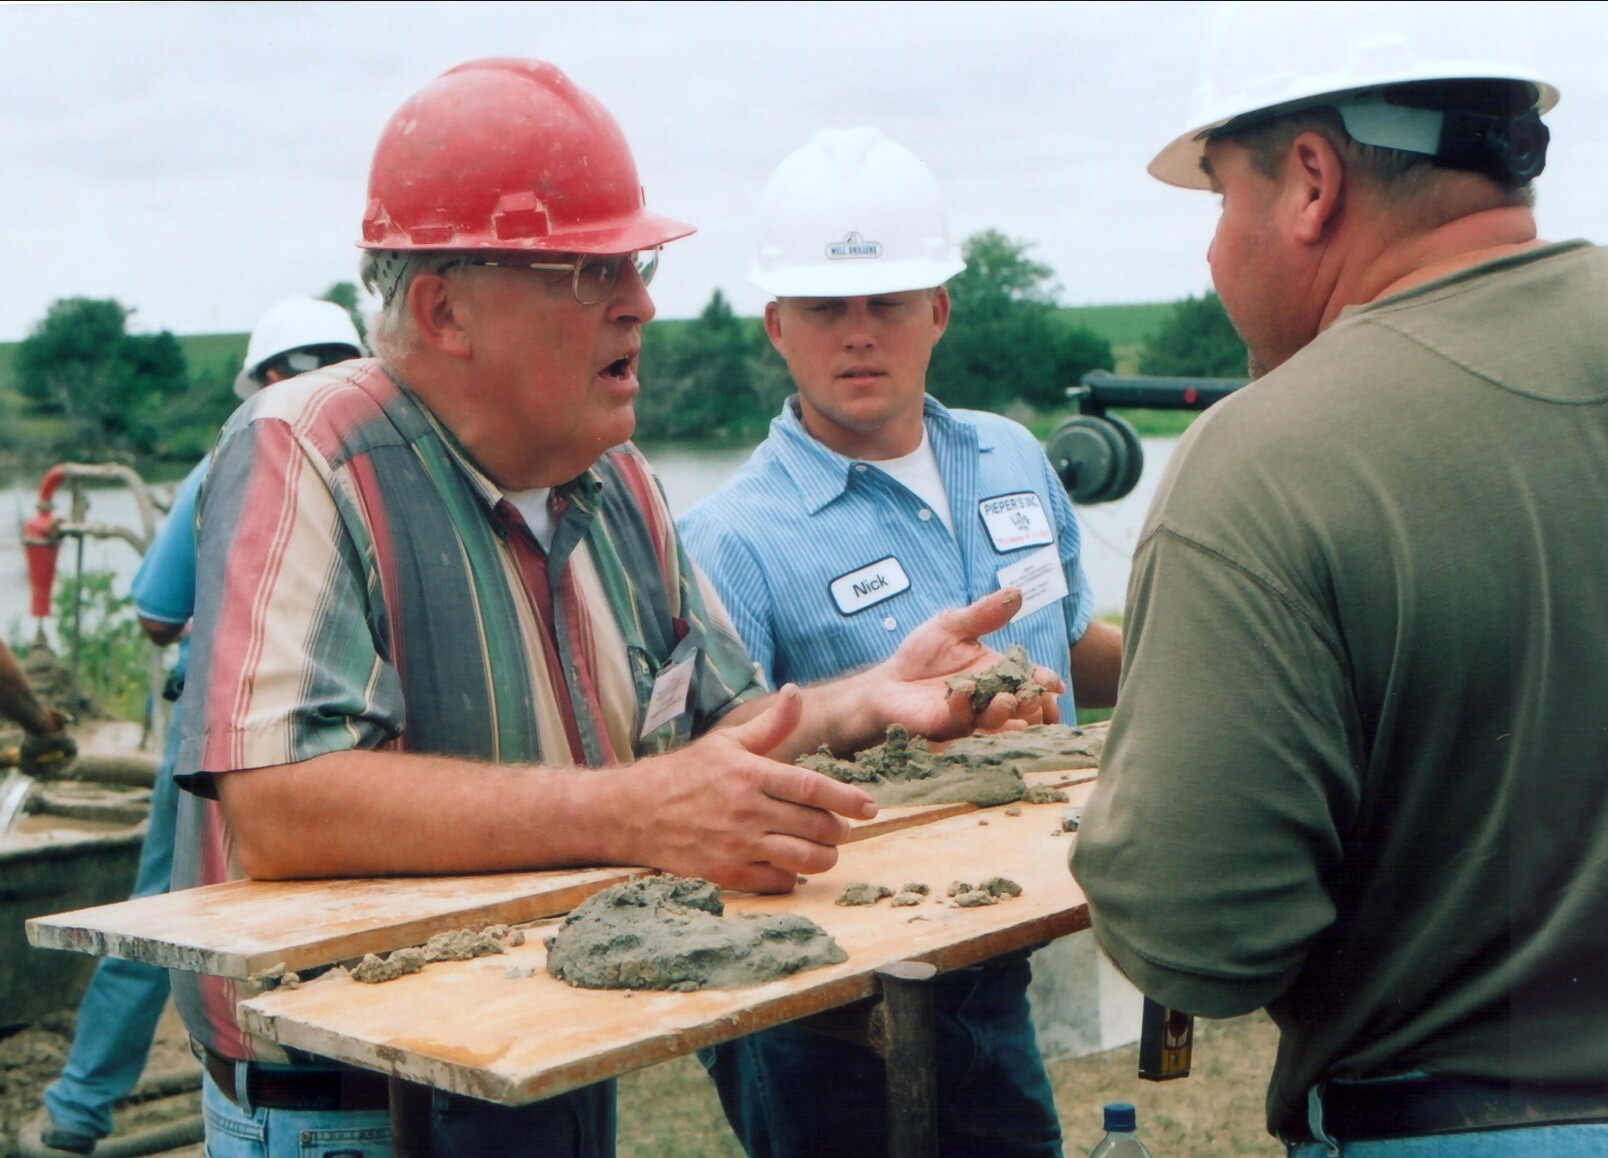 James W. Goeke holds sediment material at drill site near the Ogallala Aquifer.